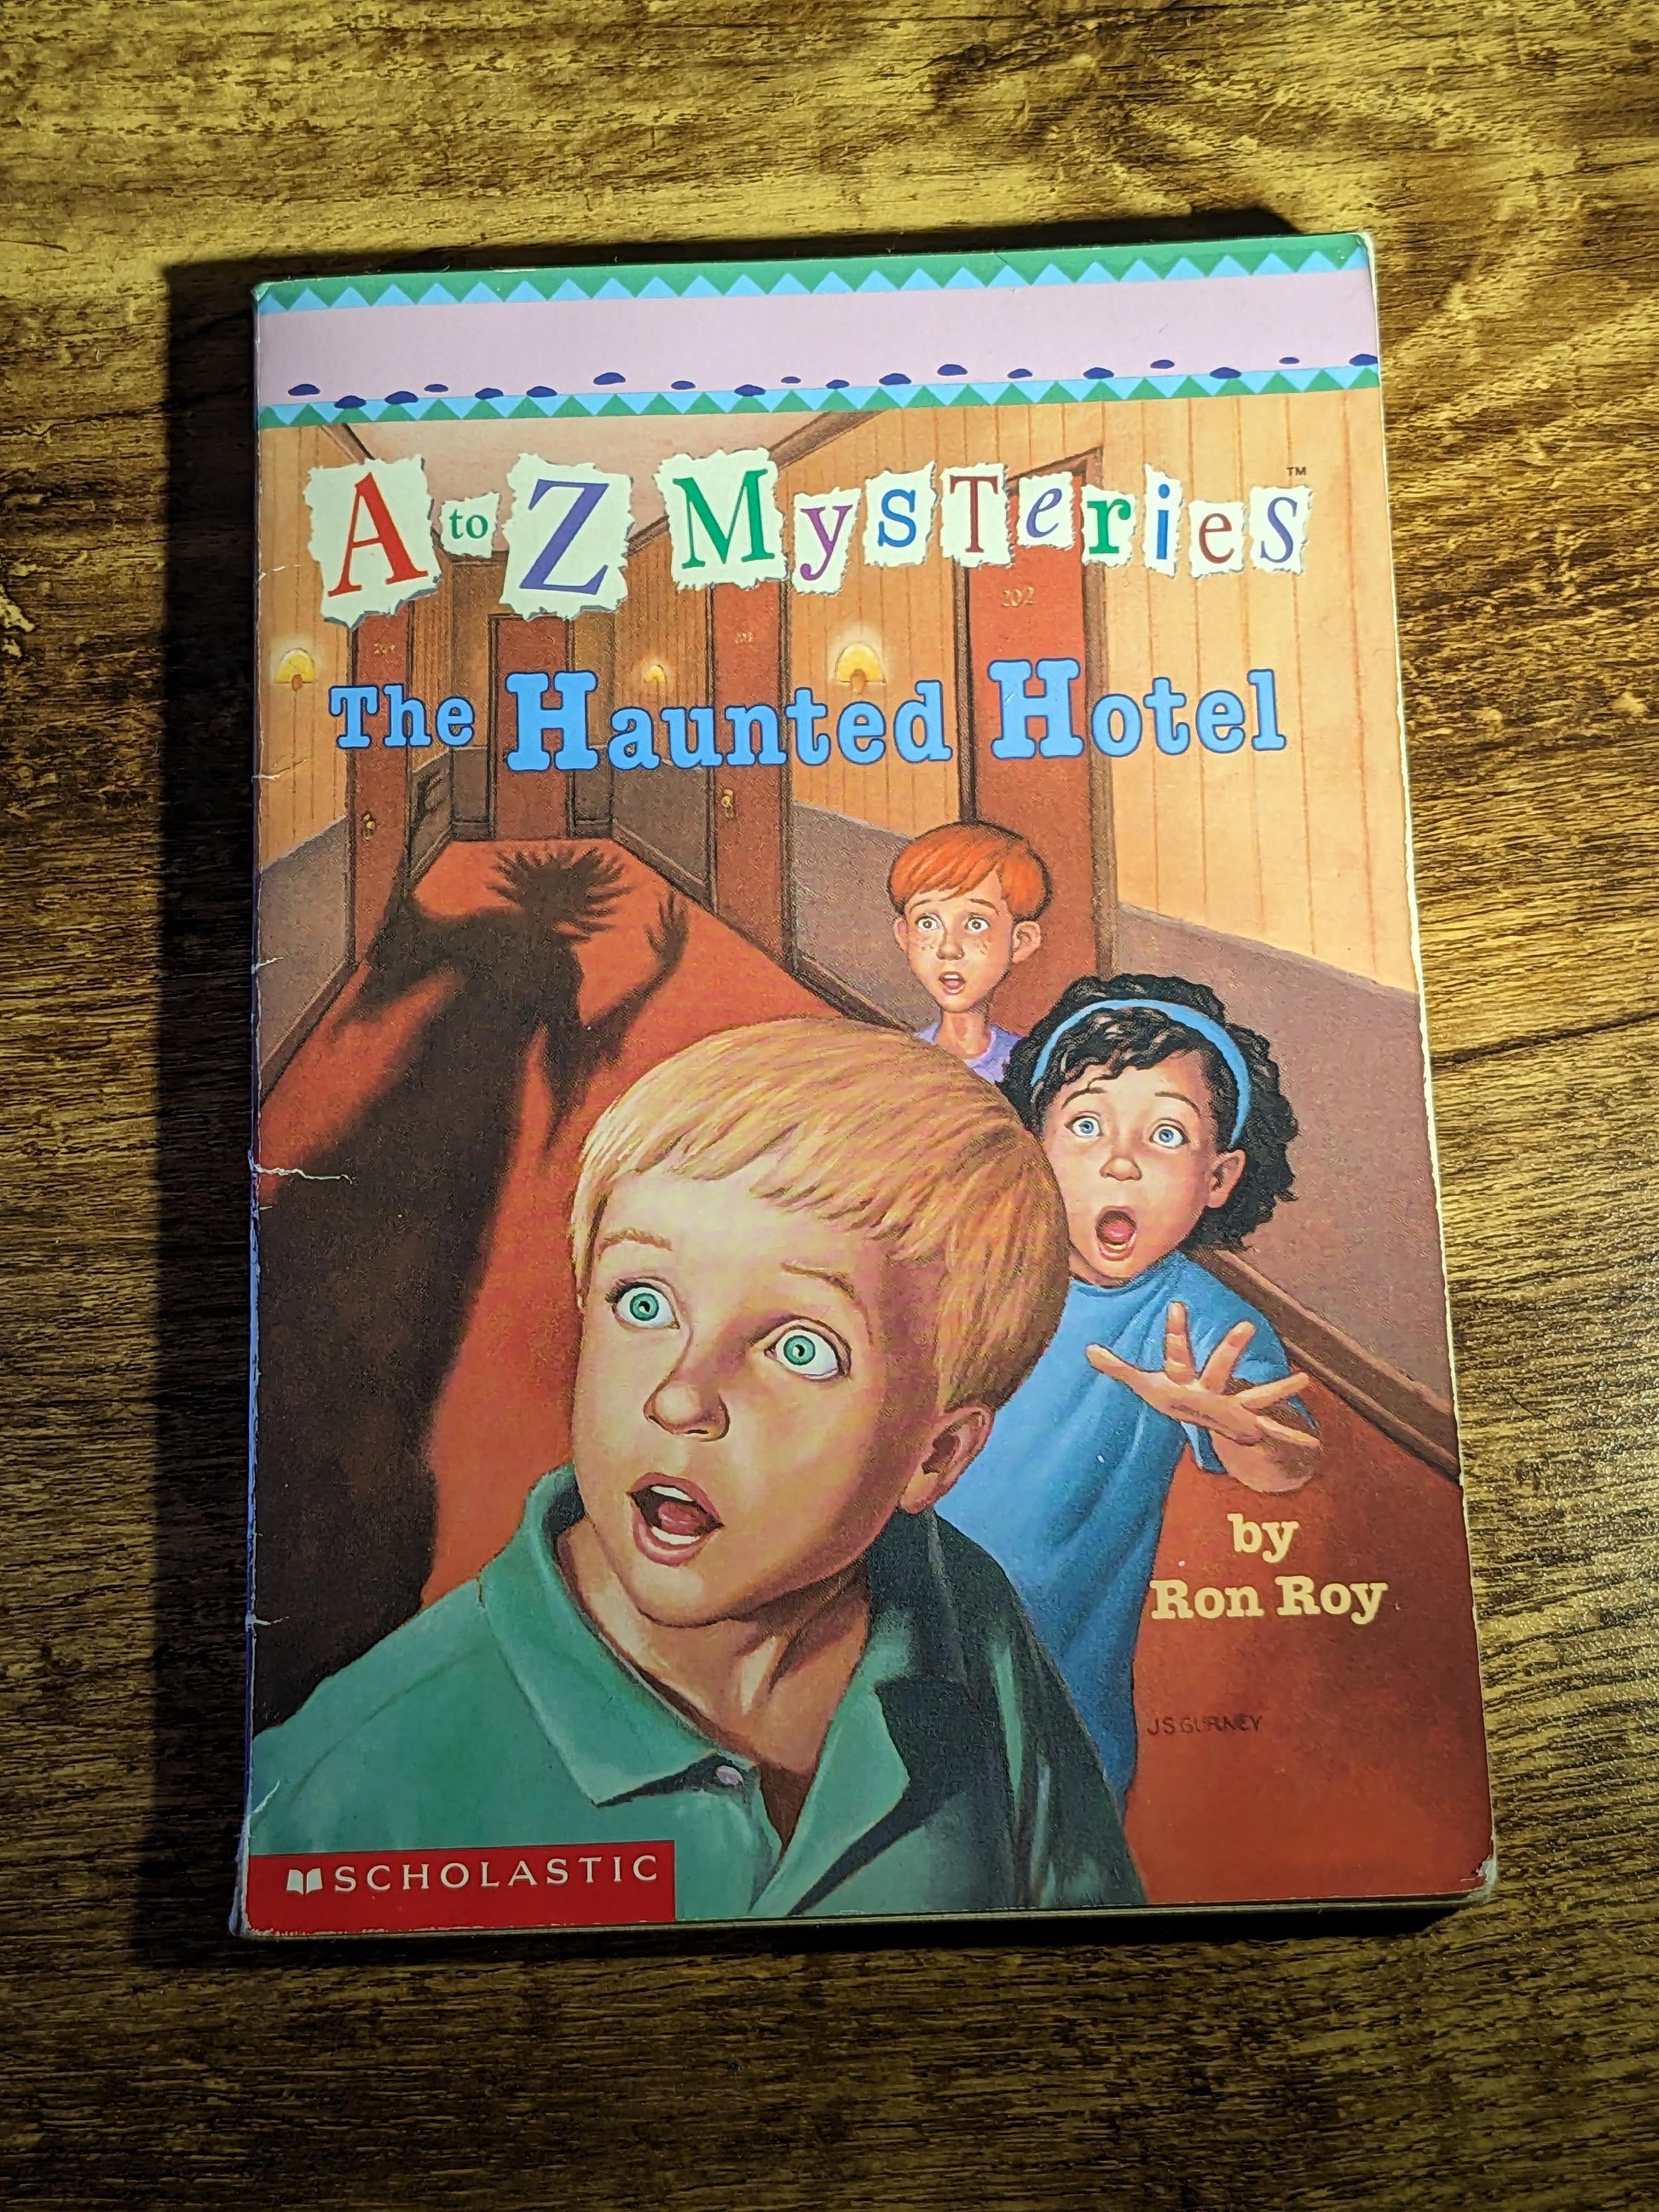 Haunted Hotel, The (A to Z Mysteries) by Ron Roy - Asylum Books